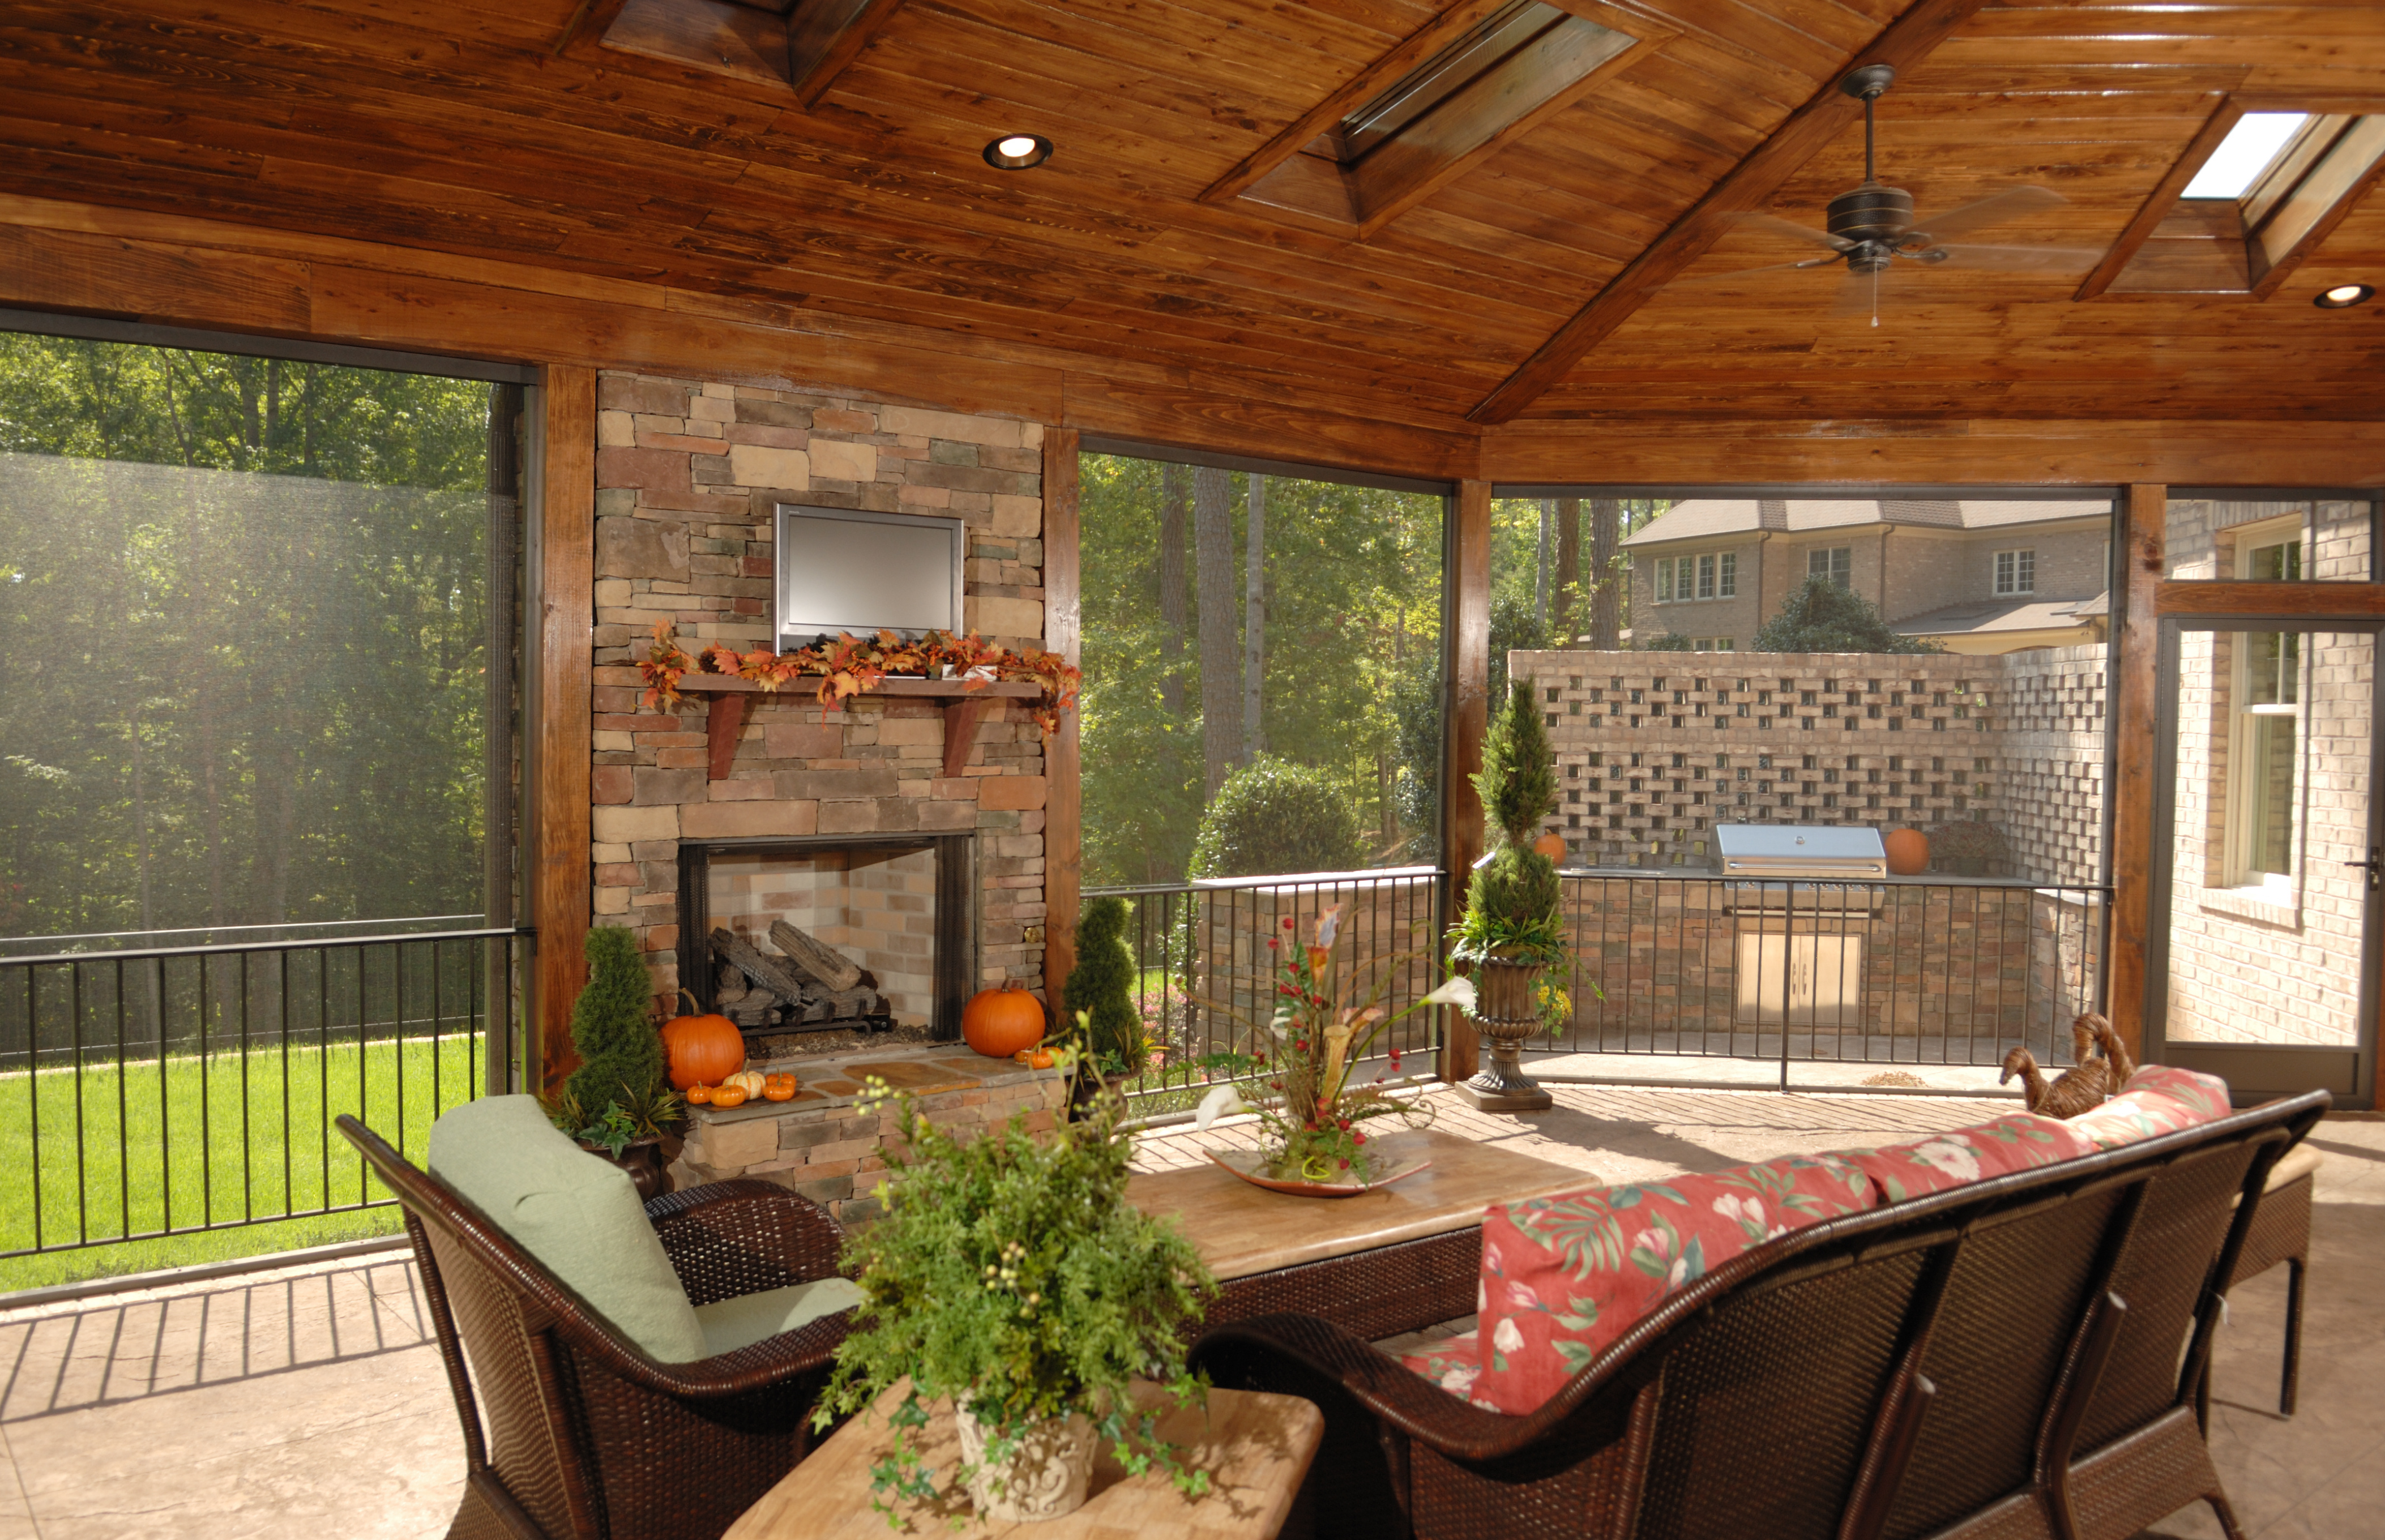 This screened-in patio uses skylights to let in natural lighting and create a warm and welcoming space.